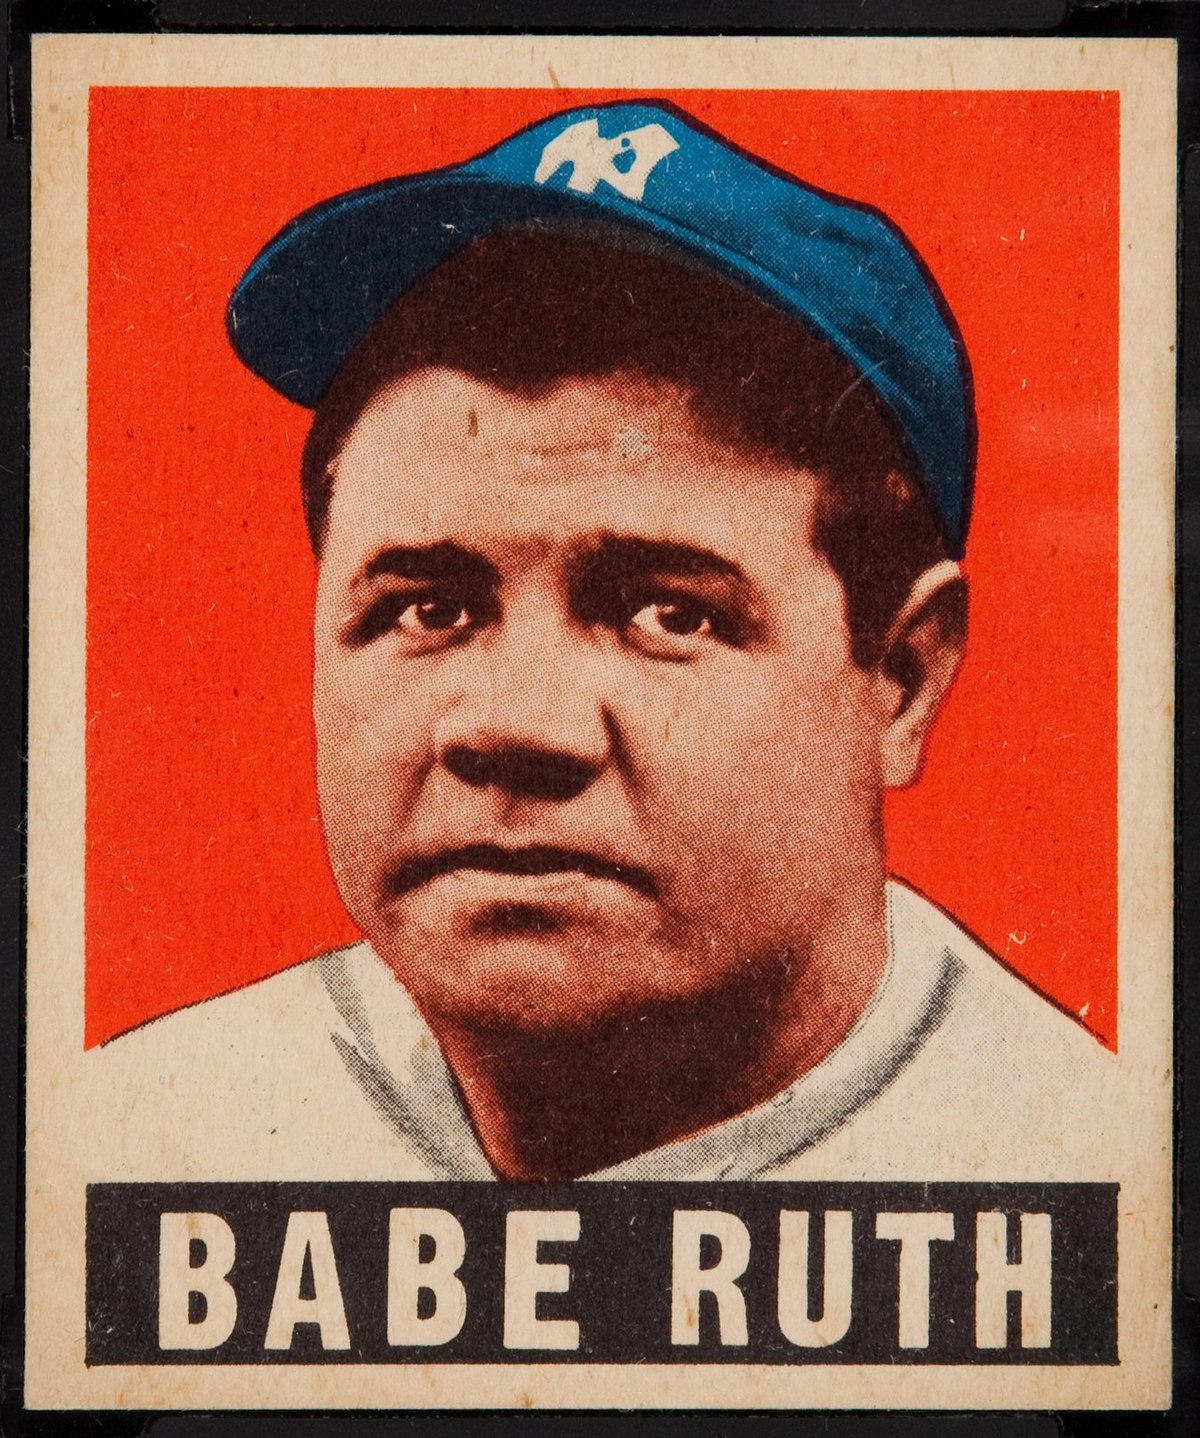 Babe Ruth's Final Public Appearance, 13 June 1948 - HistoryColored